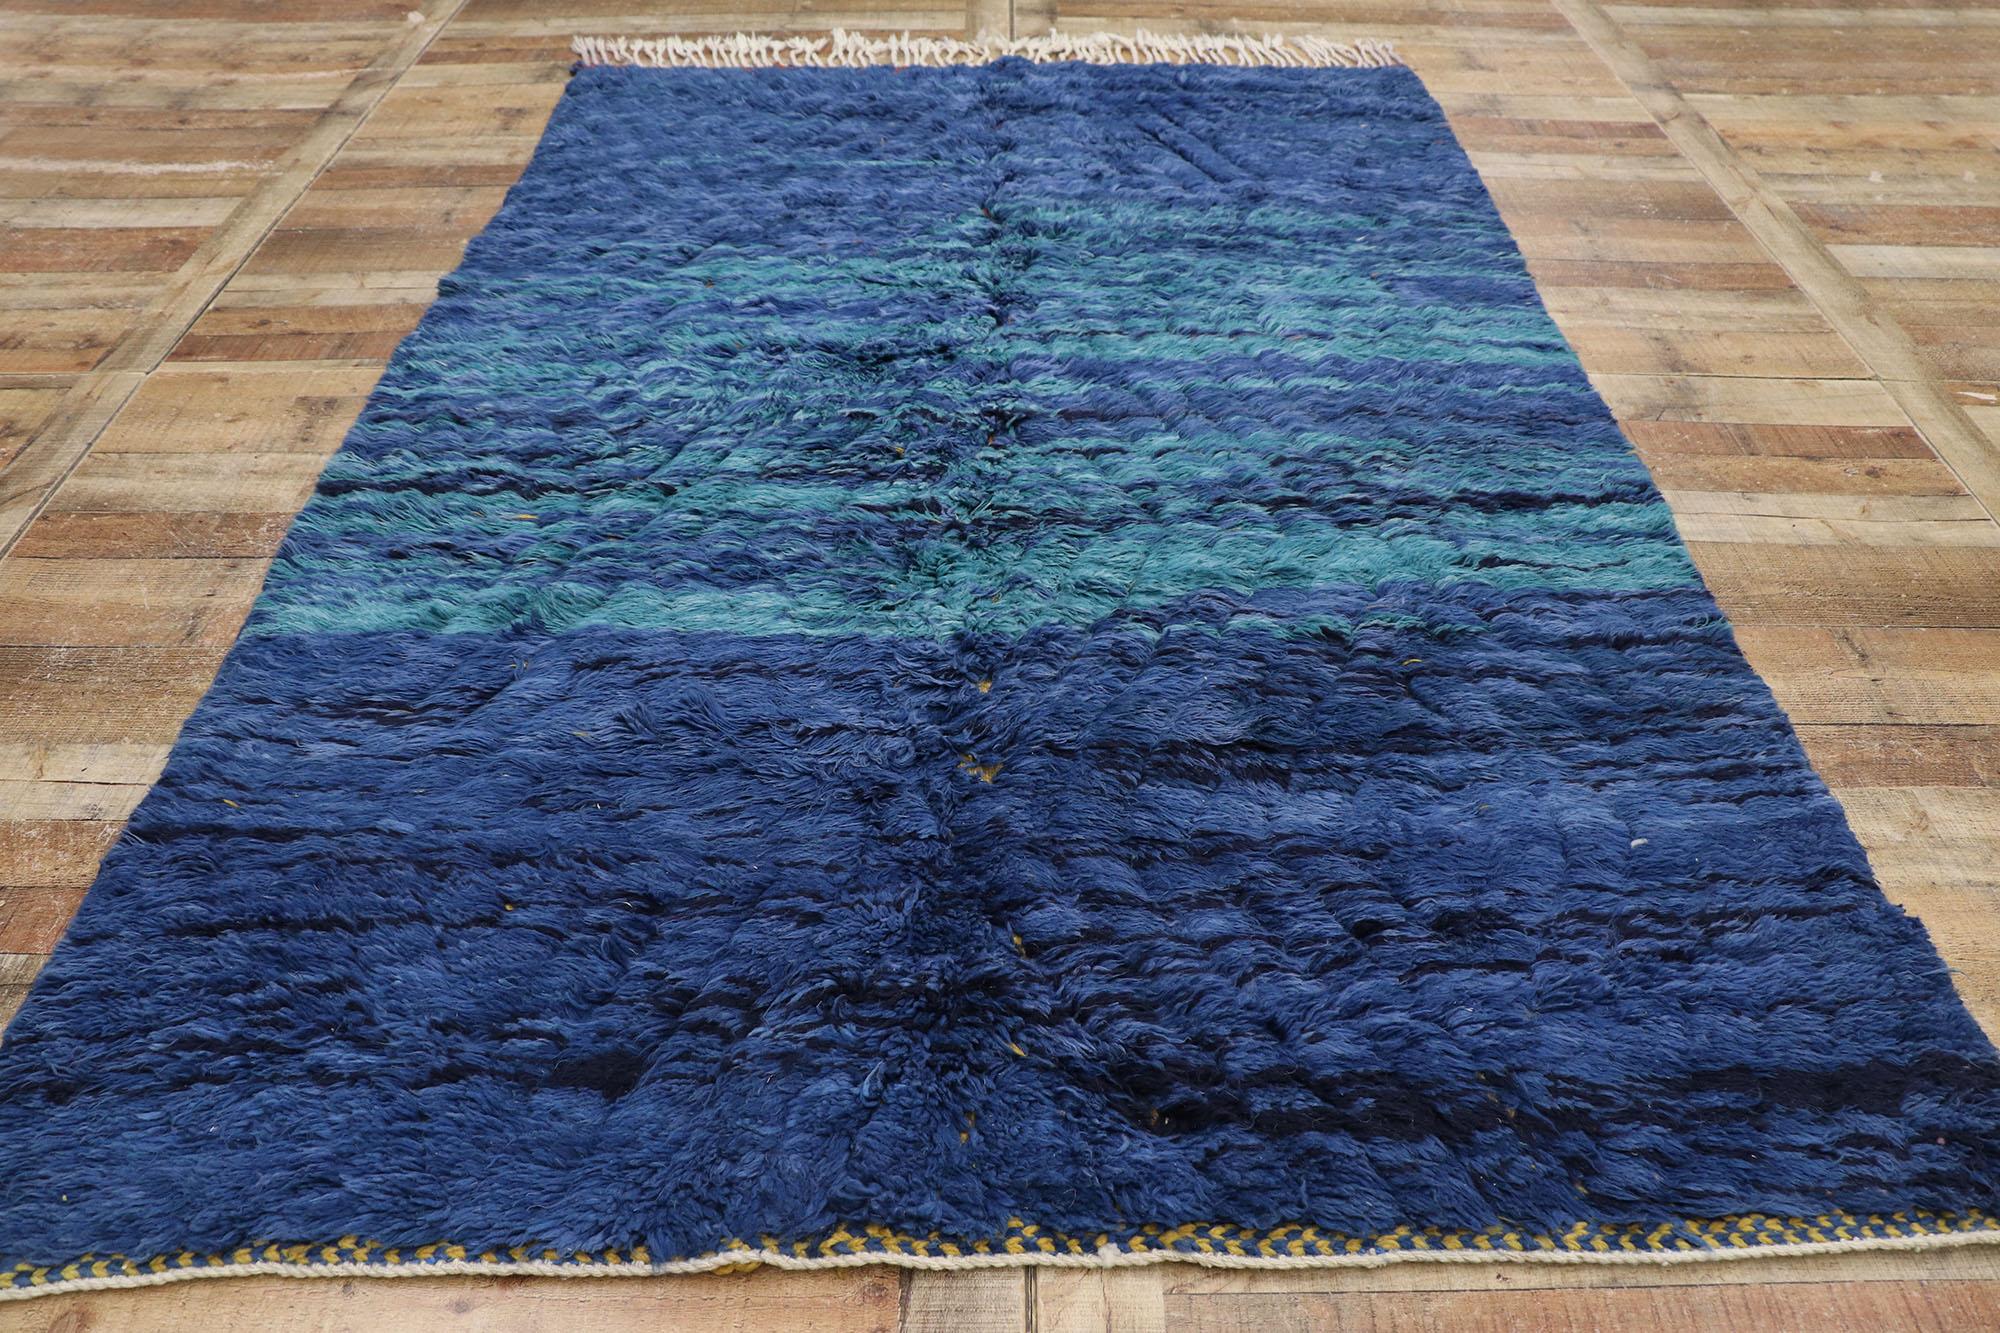 Wool Blue Berber Moroccan Rug, Modern Boho Chic Style Meets Abstract Expressionism For Sale